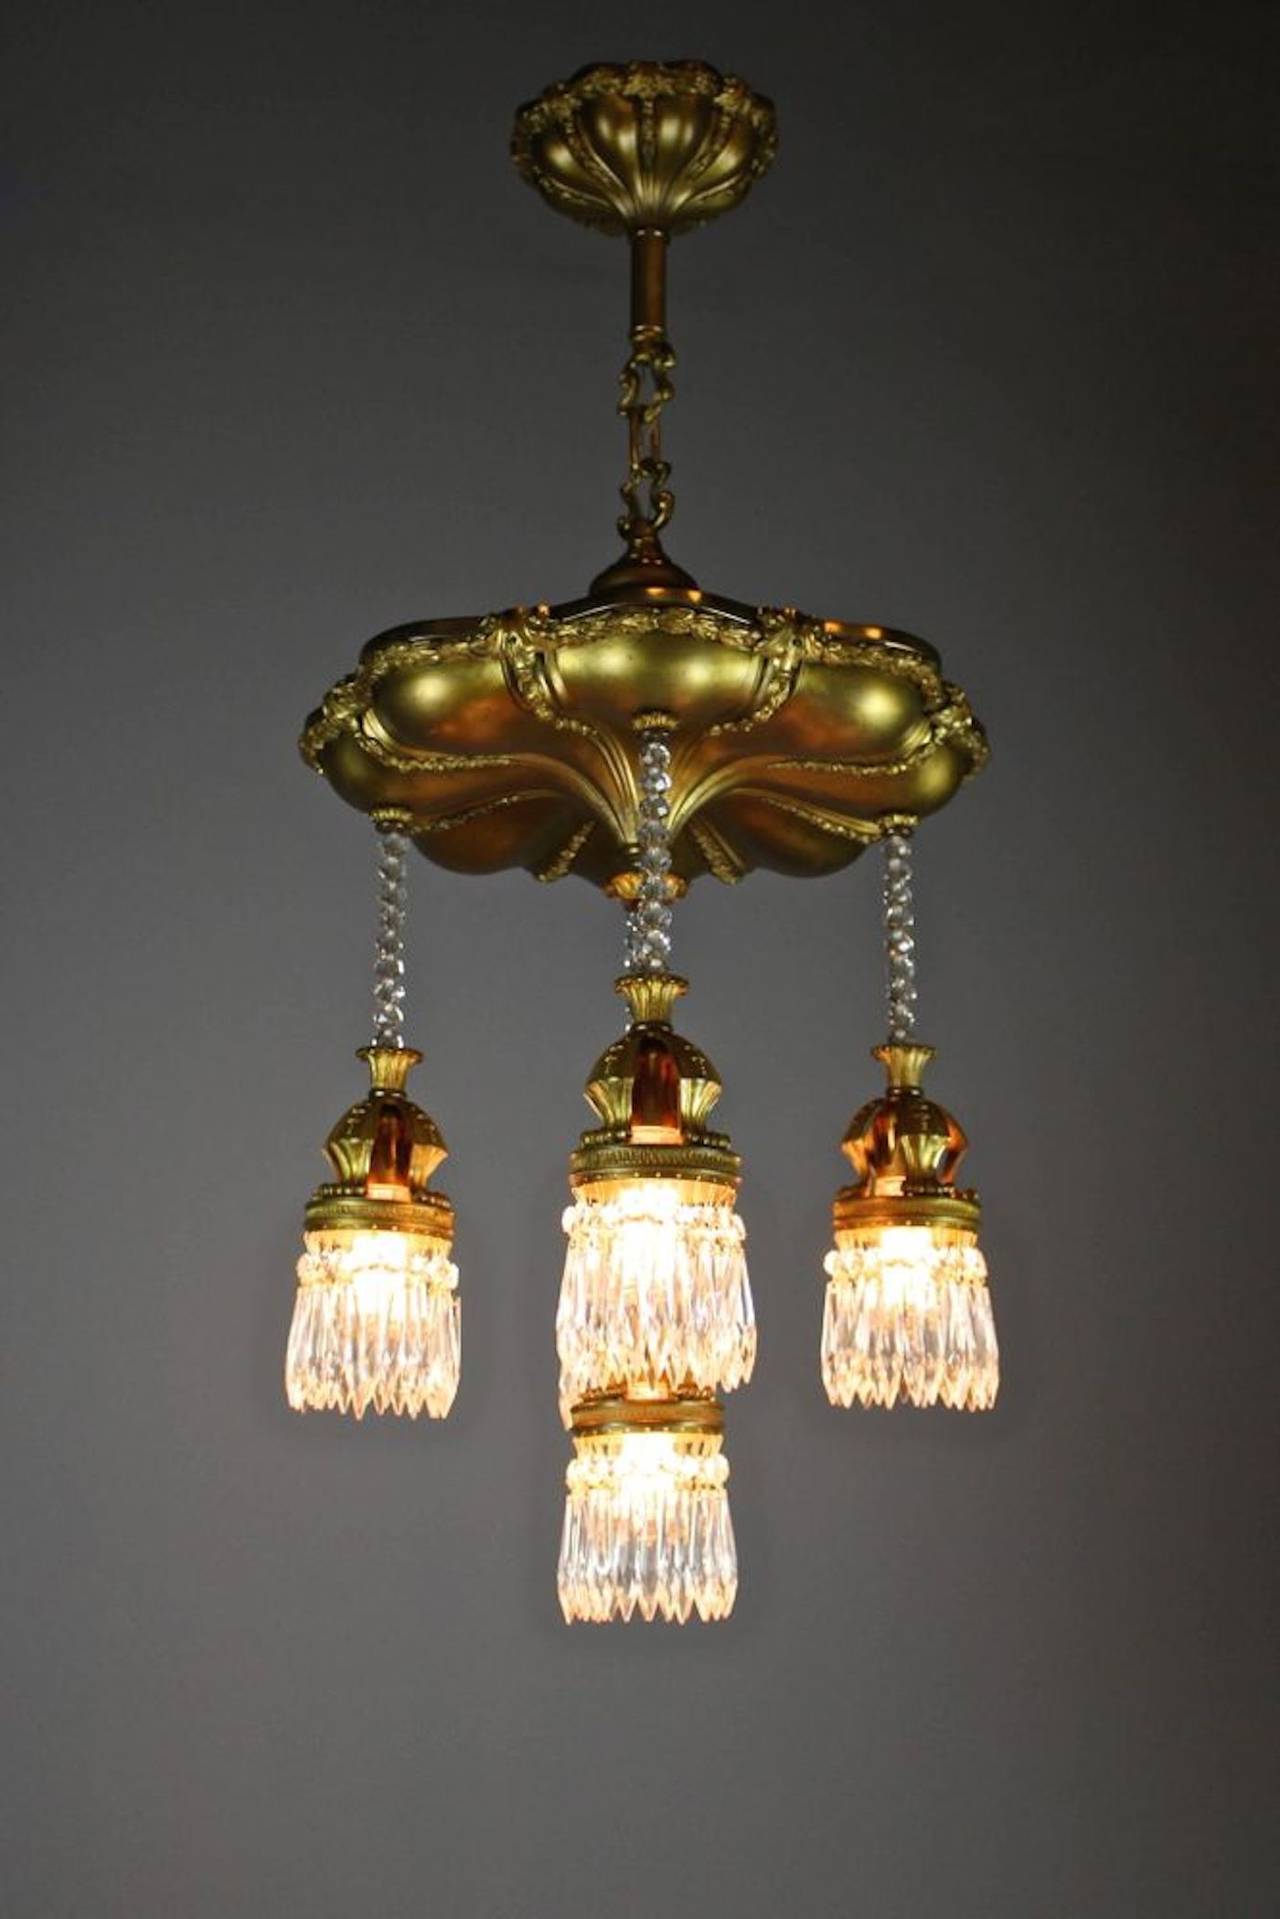 A truly gorgeous Edwardian, crystal chandelier in the Beaux-Arts style, circa 1910. Notice the rare crystal bead work with brass finish, made in Boston.
Measurements: 42